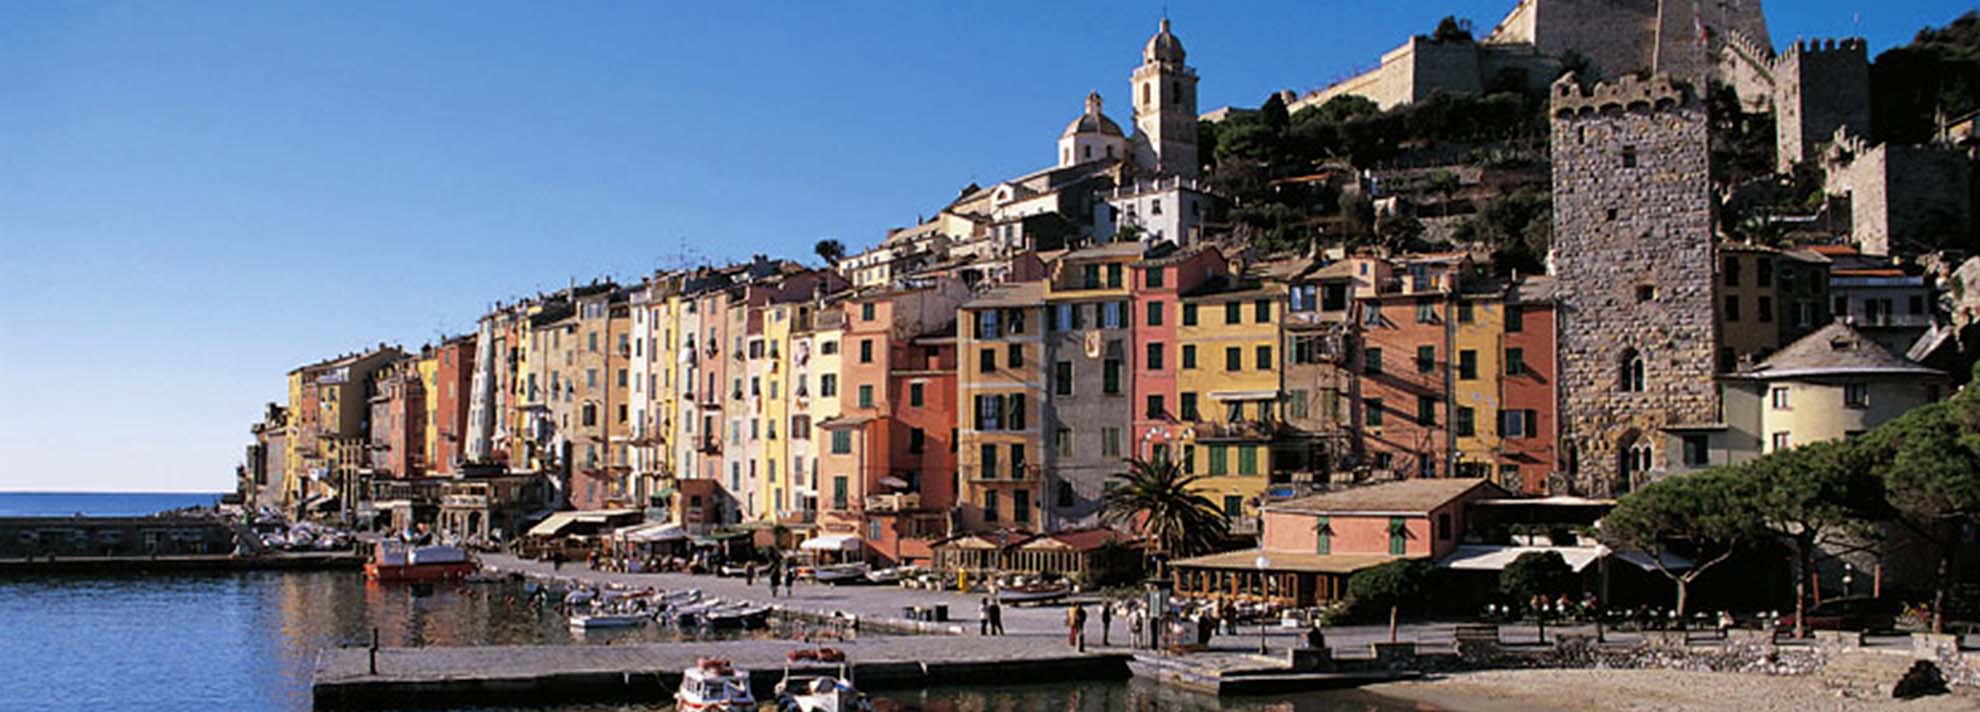 Portovenere Castle: discover the enchantment of one of the most romantic places in Liguria